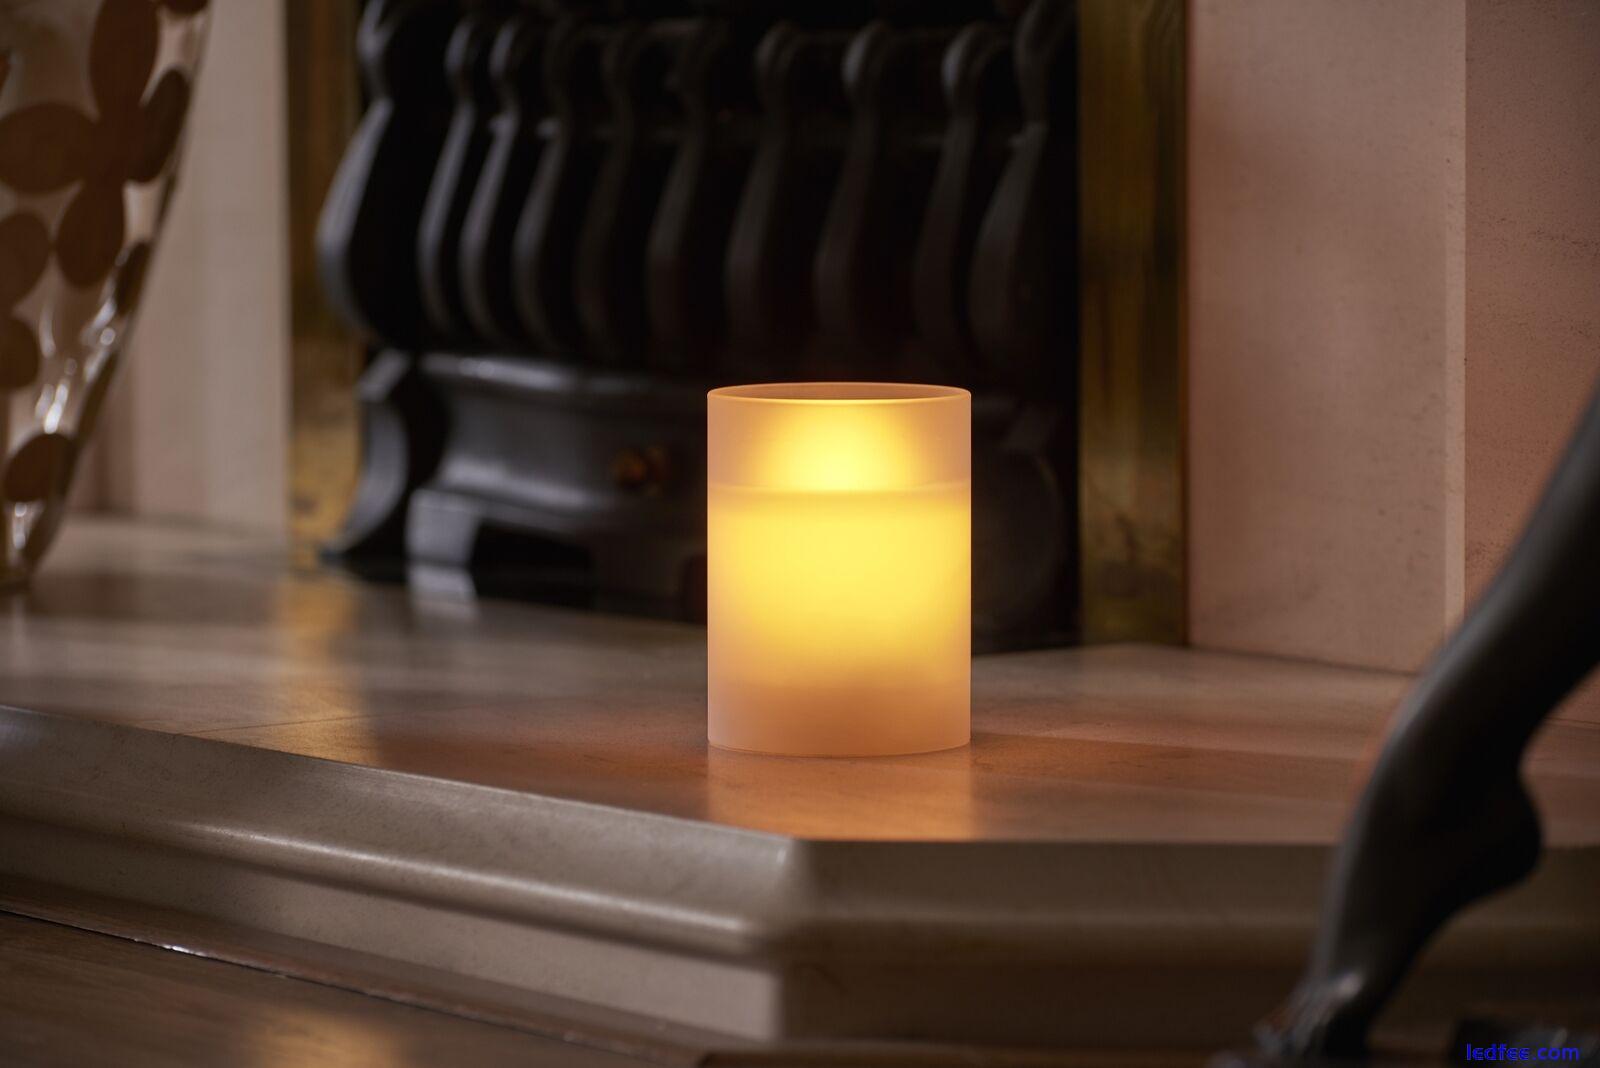 Auraglow Frosted Glass Flickering Flameless LED Decorative Candle Safety Flame 1 